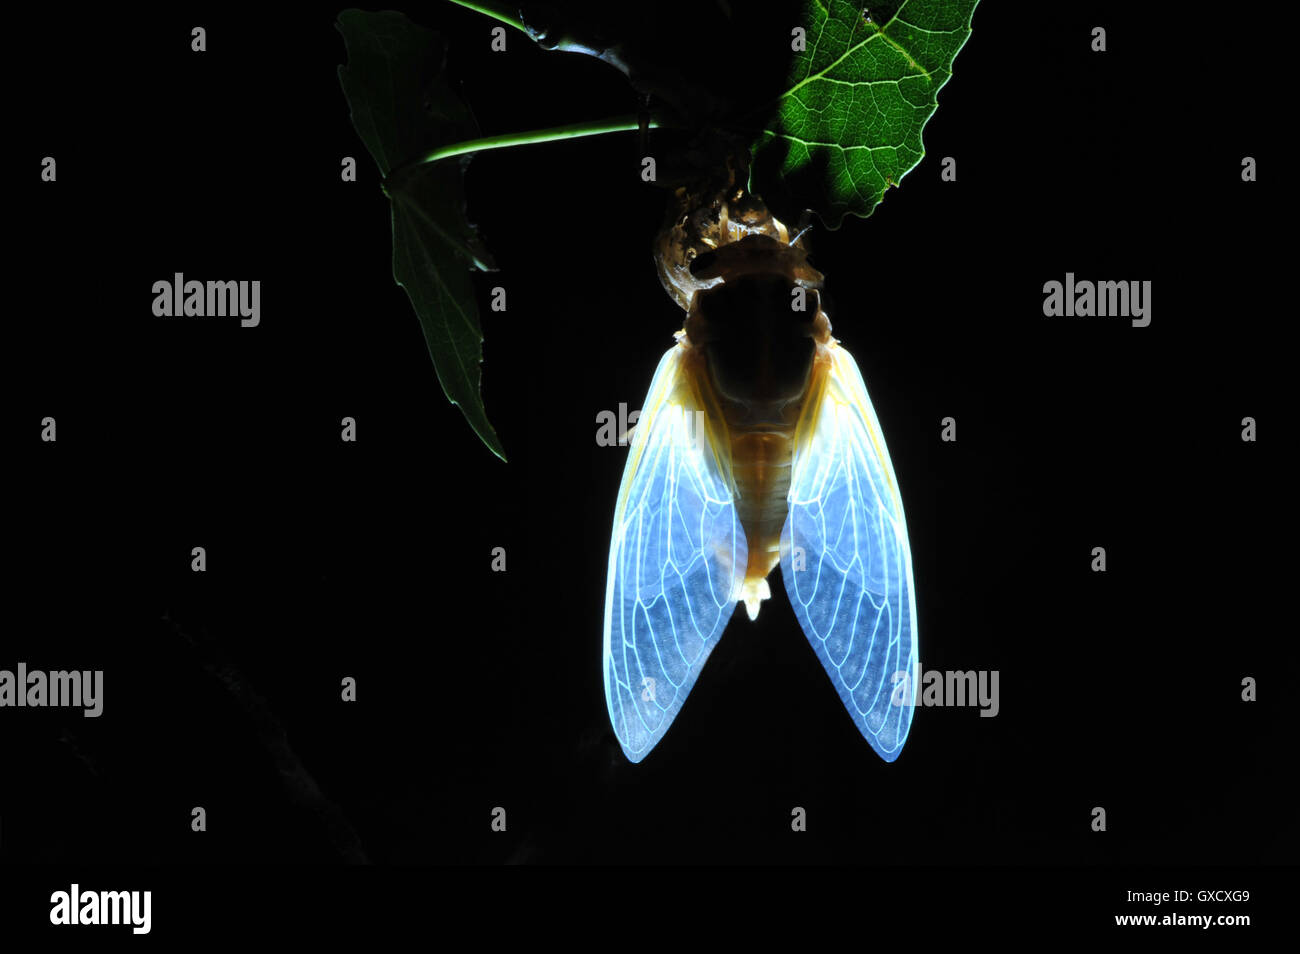 A cicada on tree branch emerging from its nymph exoskeleton, night time Stock Photo